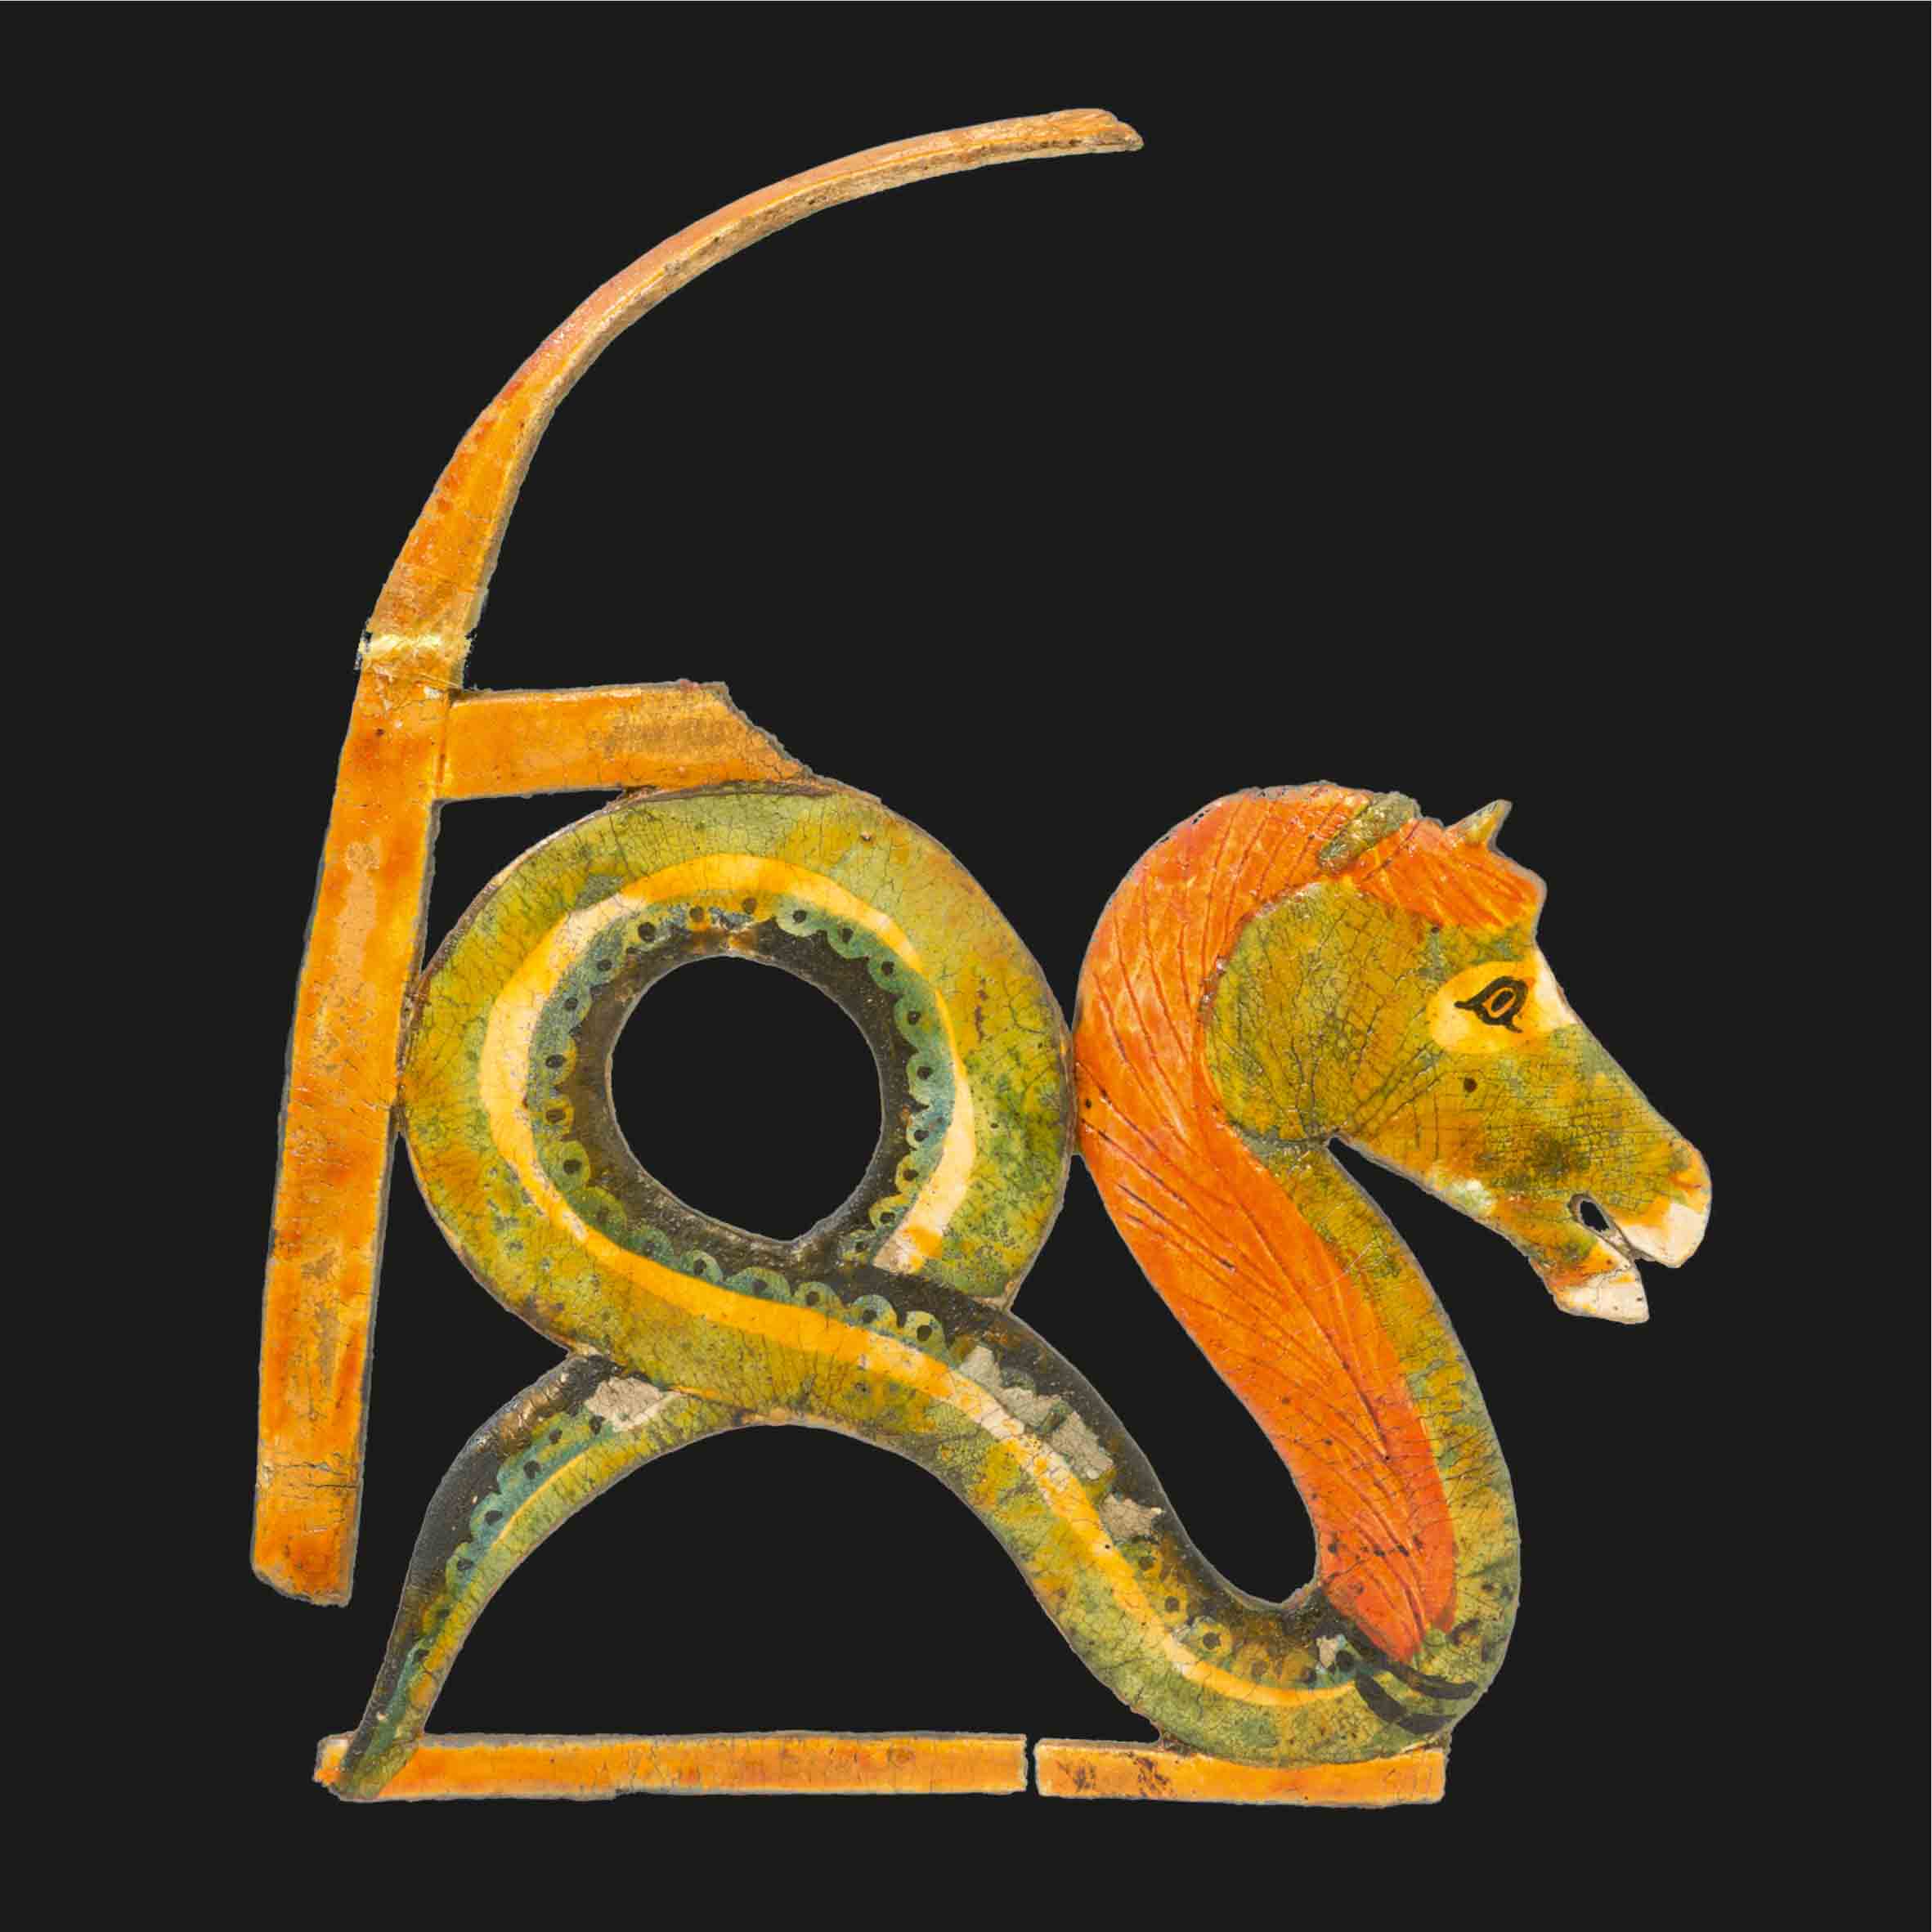 Colourful artefact in the form of a creature with the head of a horse and the body of a snake